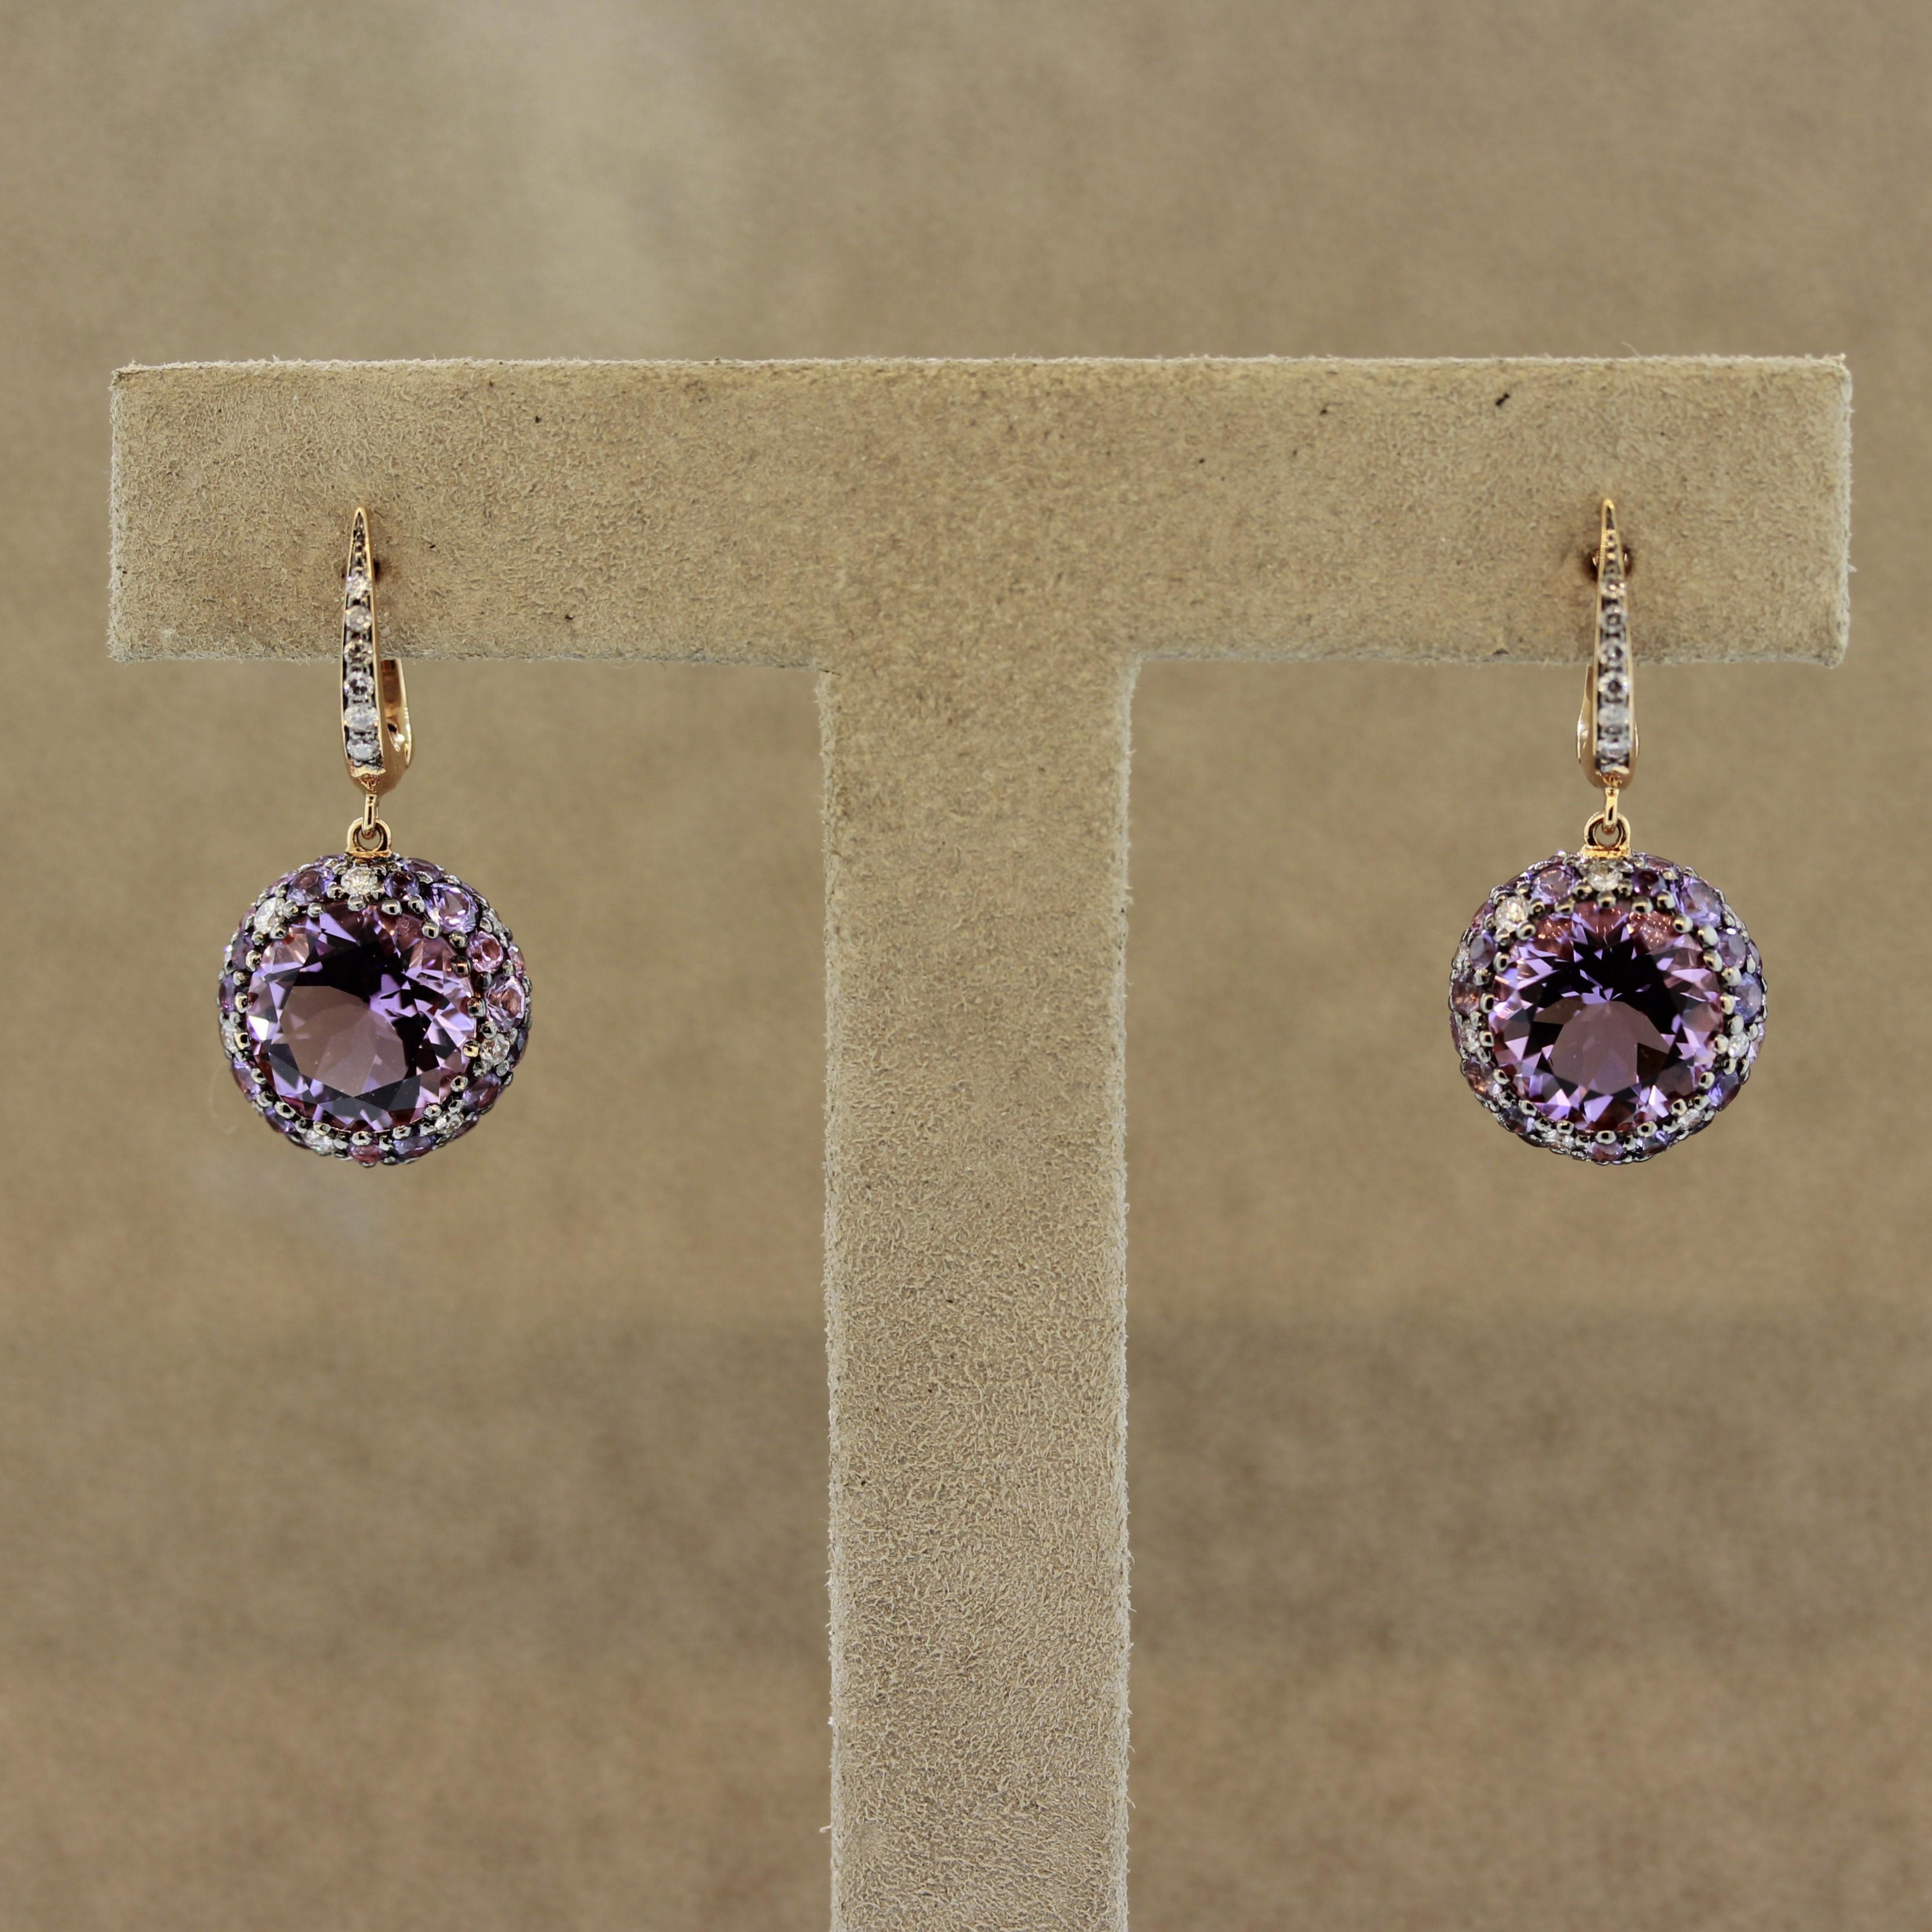 A stylish and chic pair of drop earrings. They feature a total of 2.46 carats of amethyst which are the two large center round stones. Adding to that are 2.70 carats of fancy pink and purple sapphire set around the sides along with 0.56 carats of